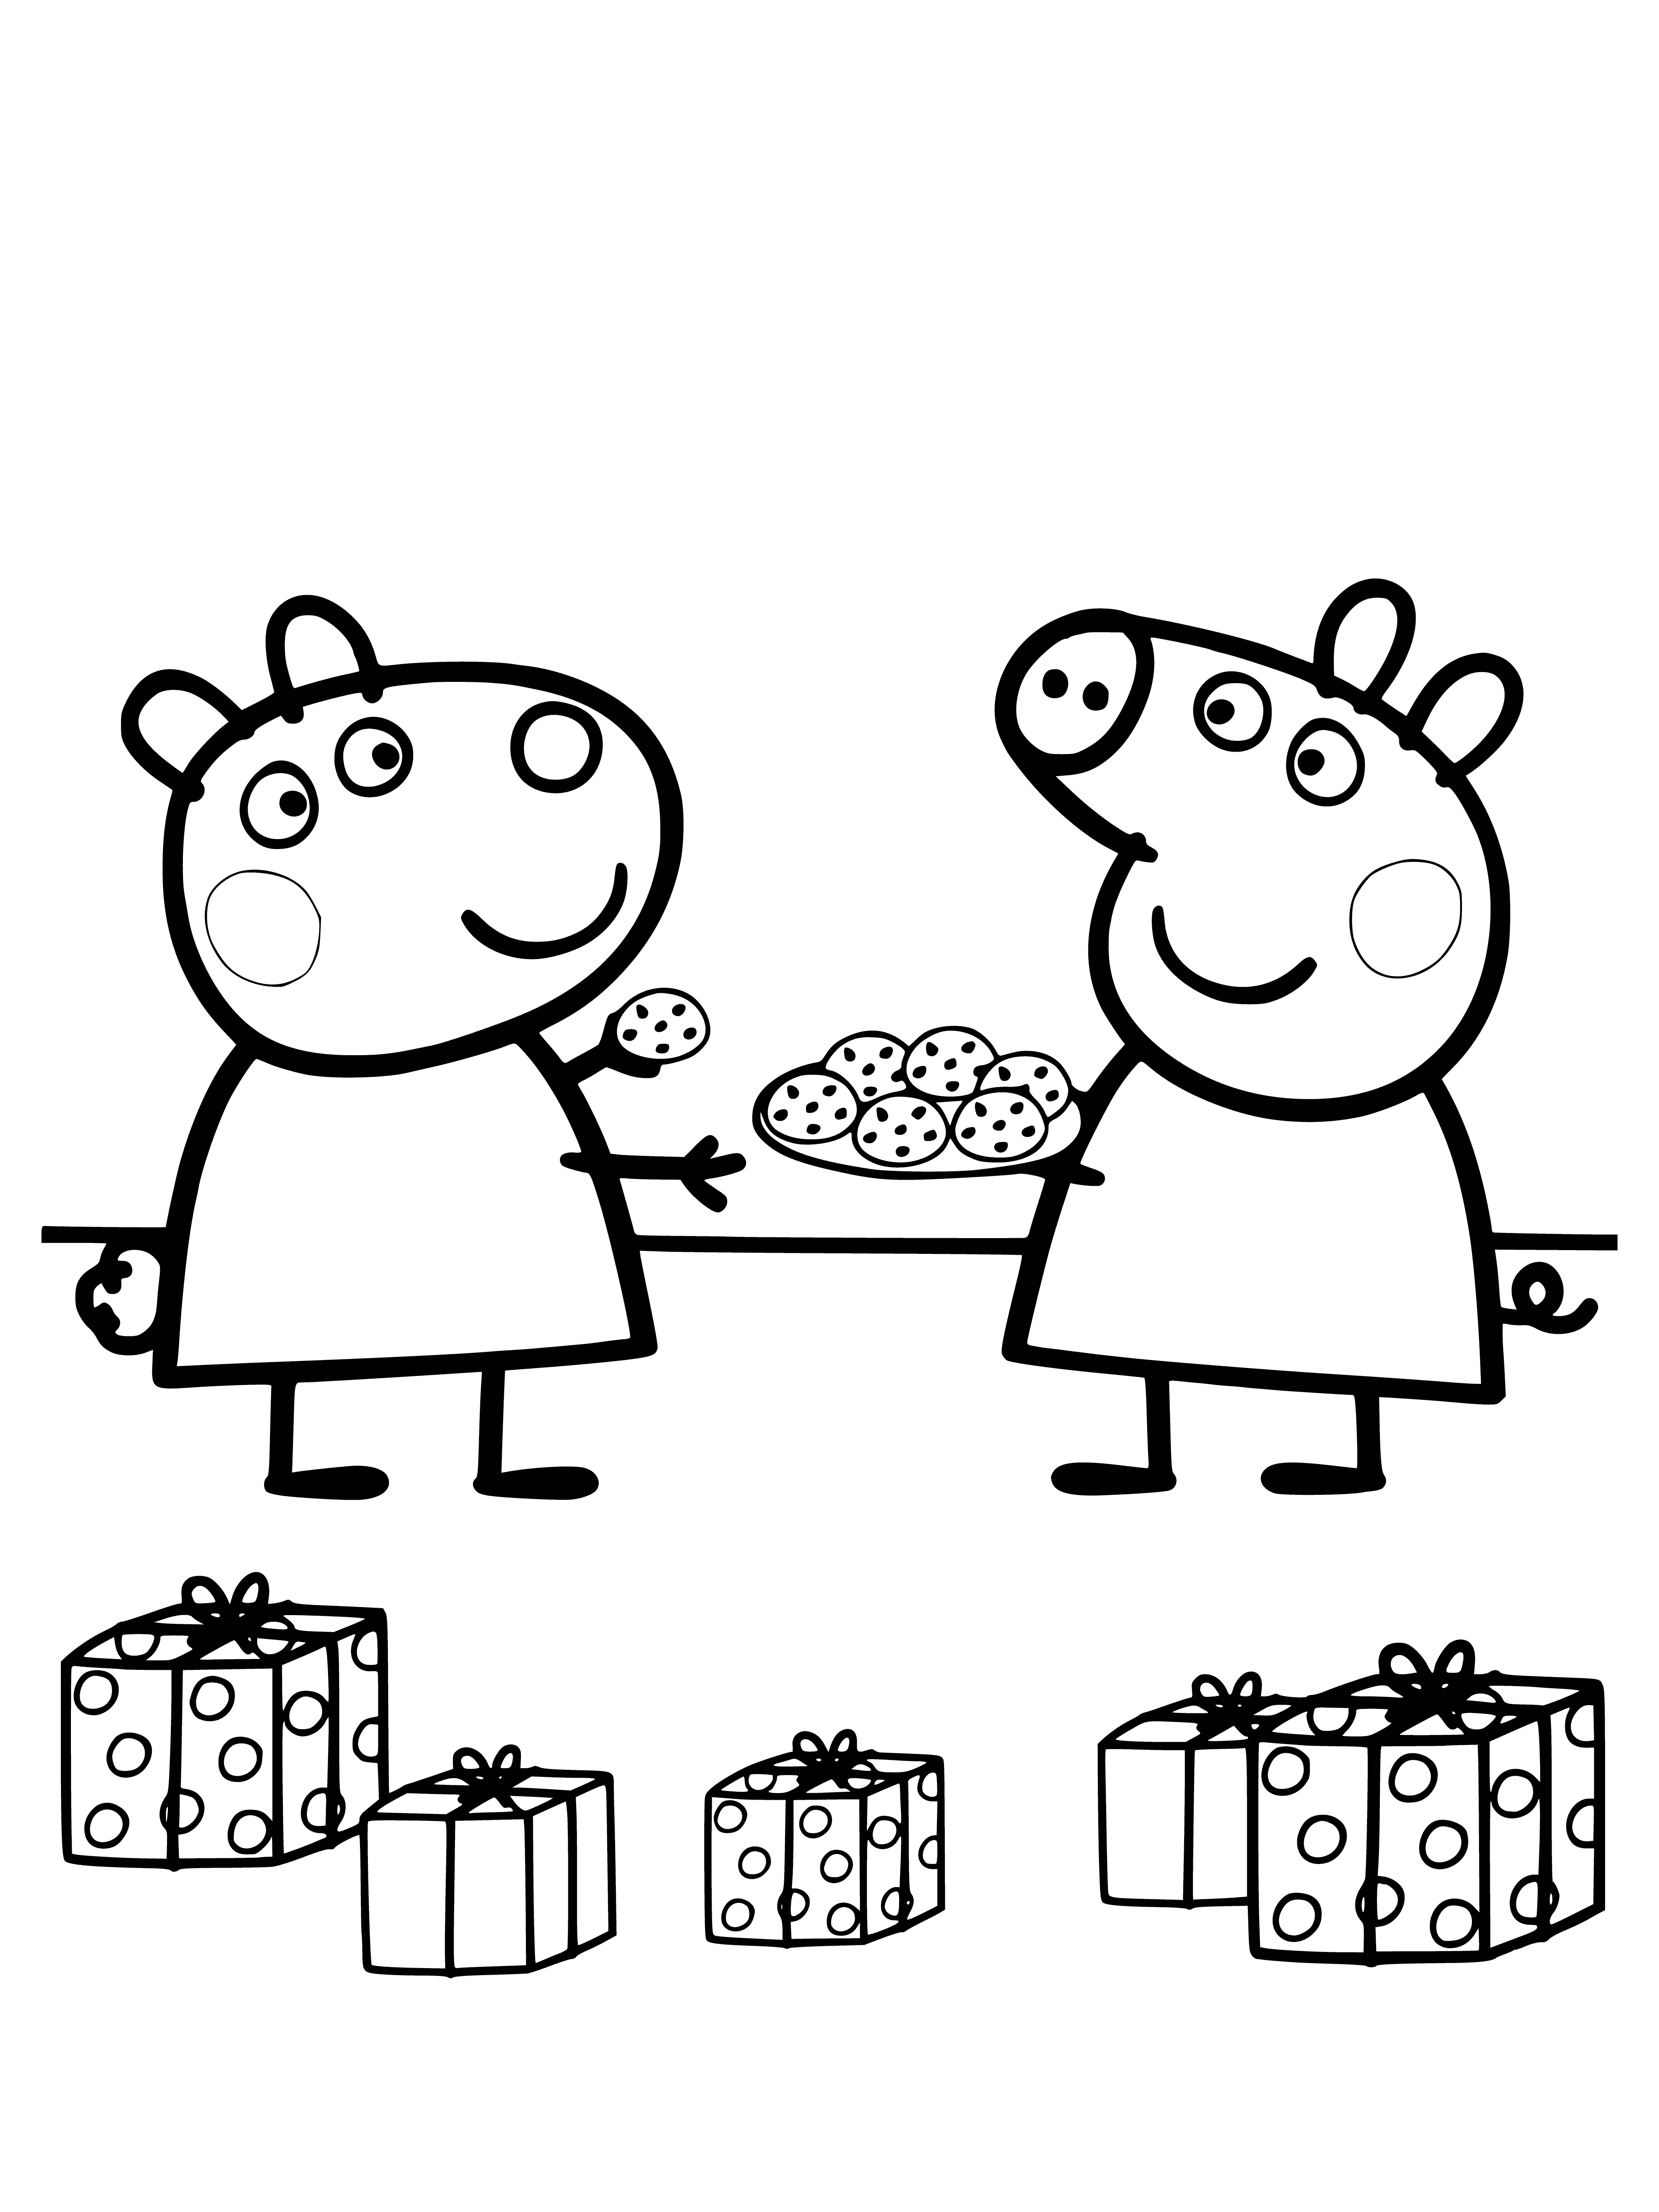 Susie the Sheep and Peppa Pig coloring page